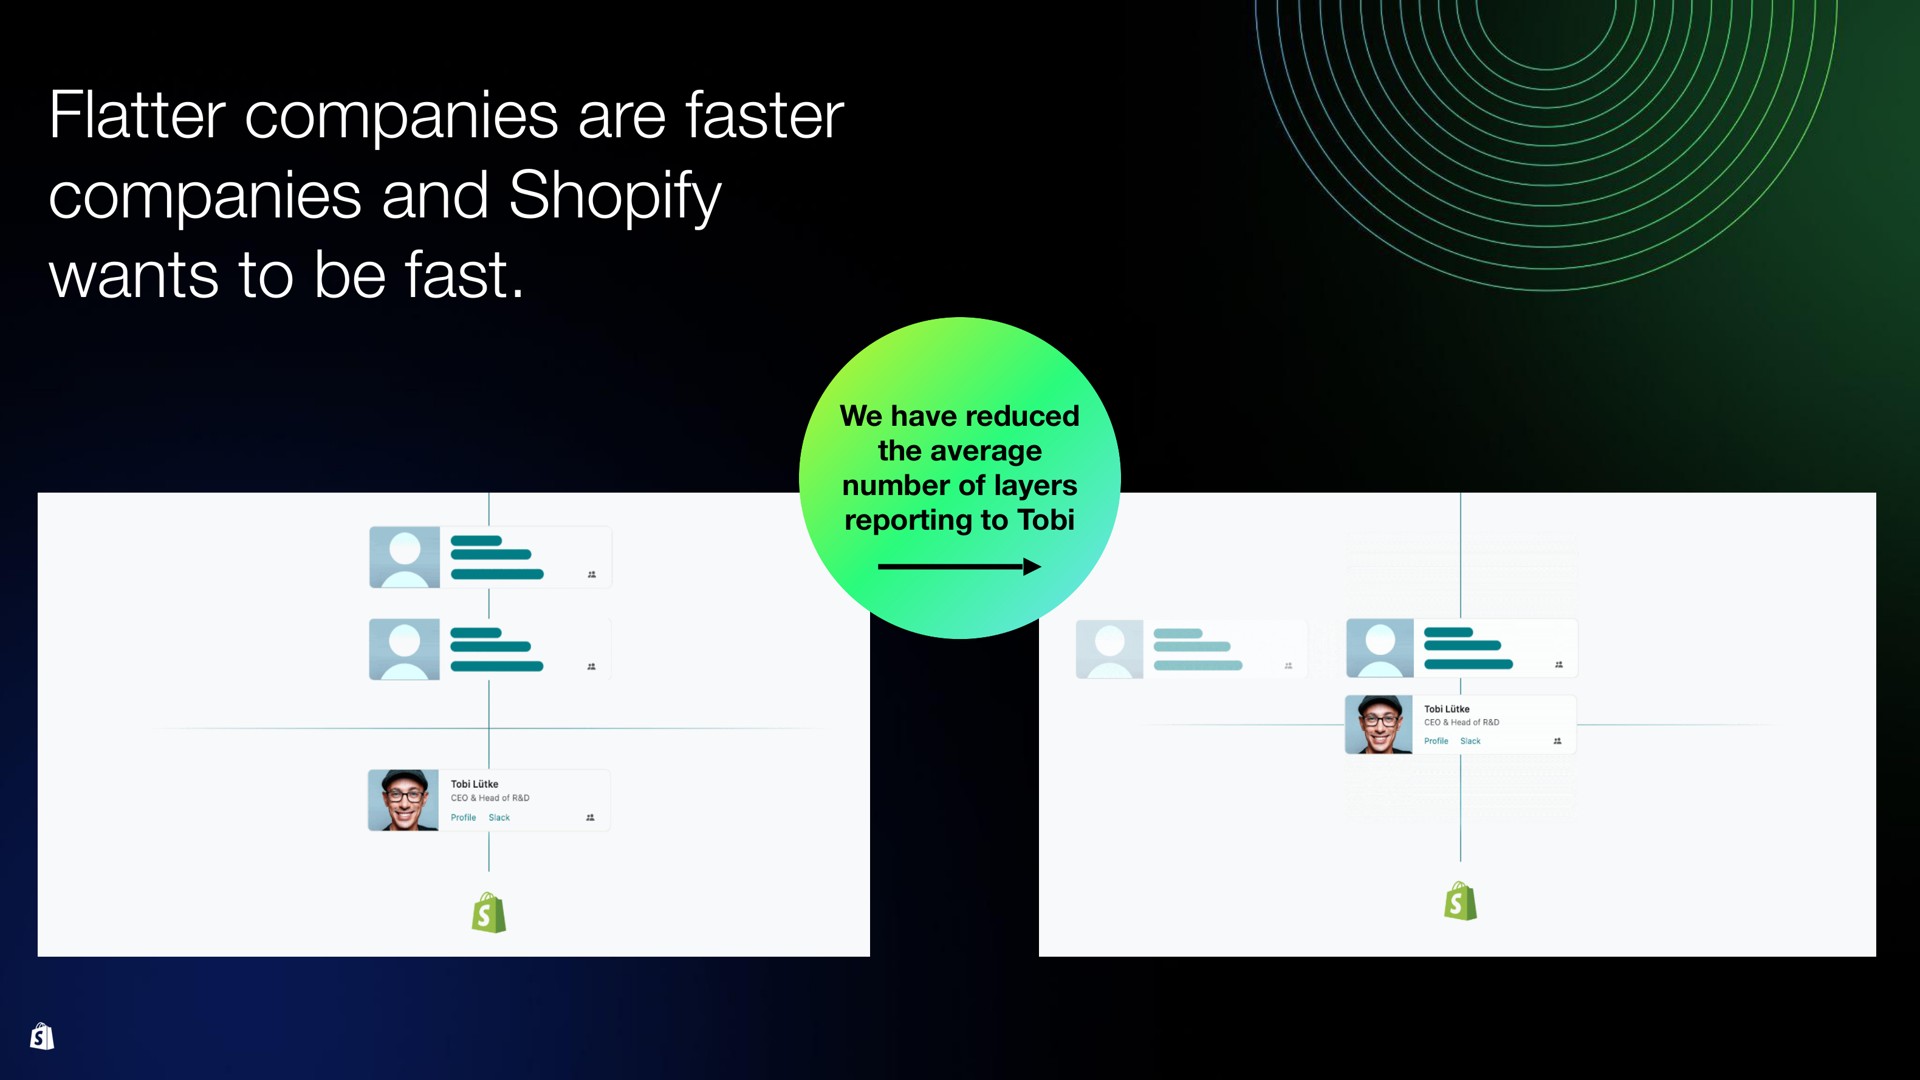 flatter companies are faster companies and wants to be fast | Shopify